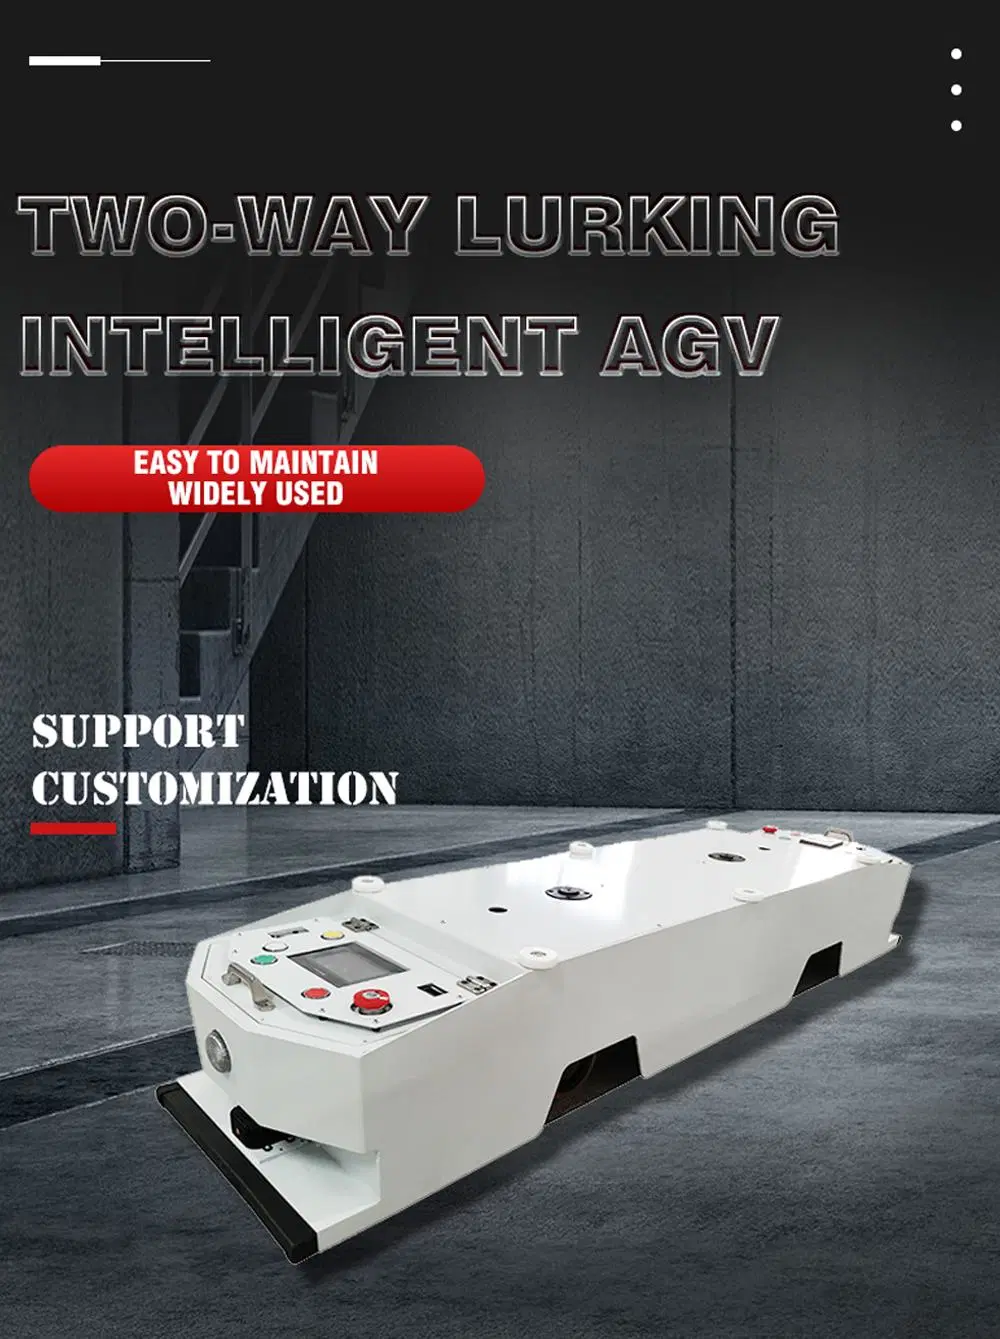 Can Be Customized 600kg Heavy Load Capacity Lurking Agv Robot Warehouse Way Agv Automated Guided Vehicle with Fast Robot Chassis (TZAGV-LB01)